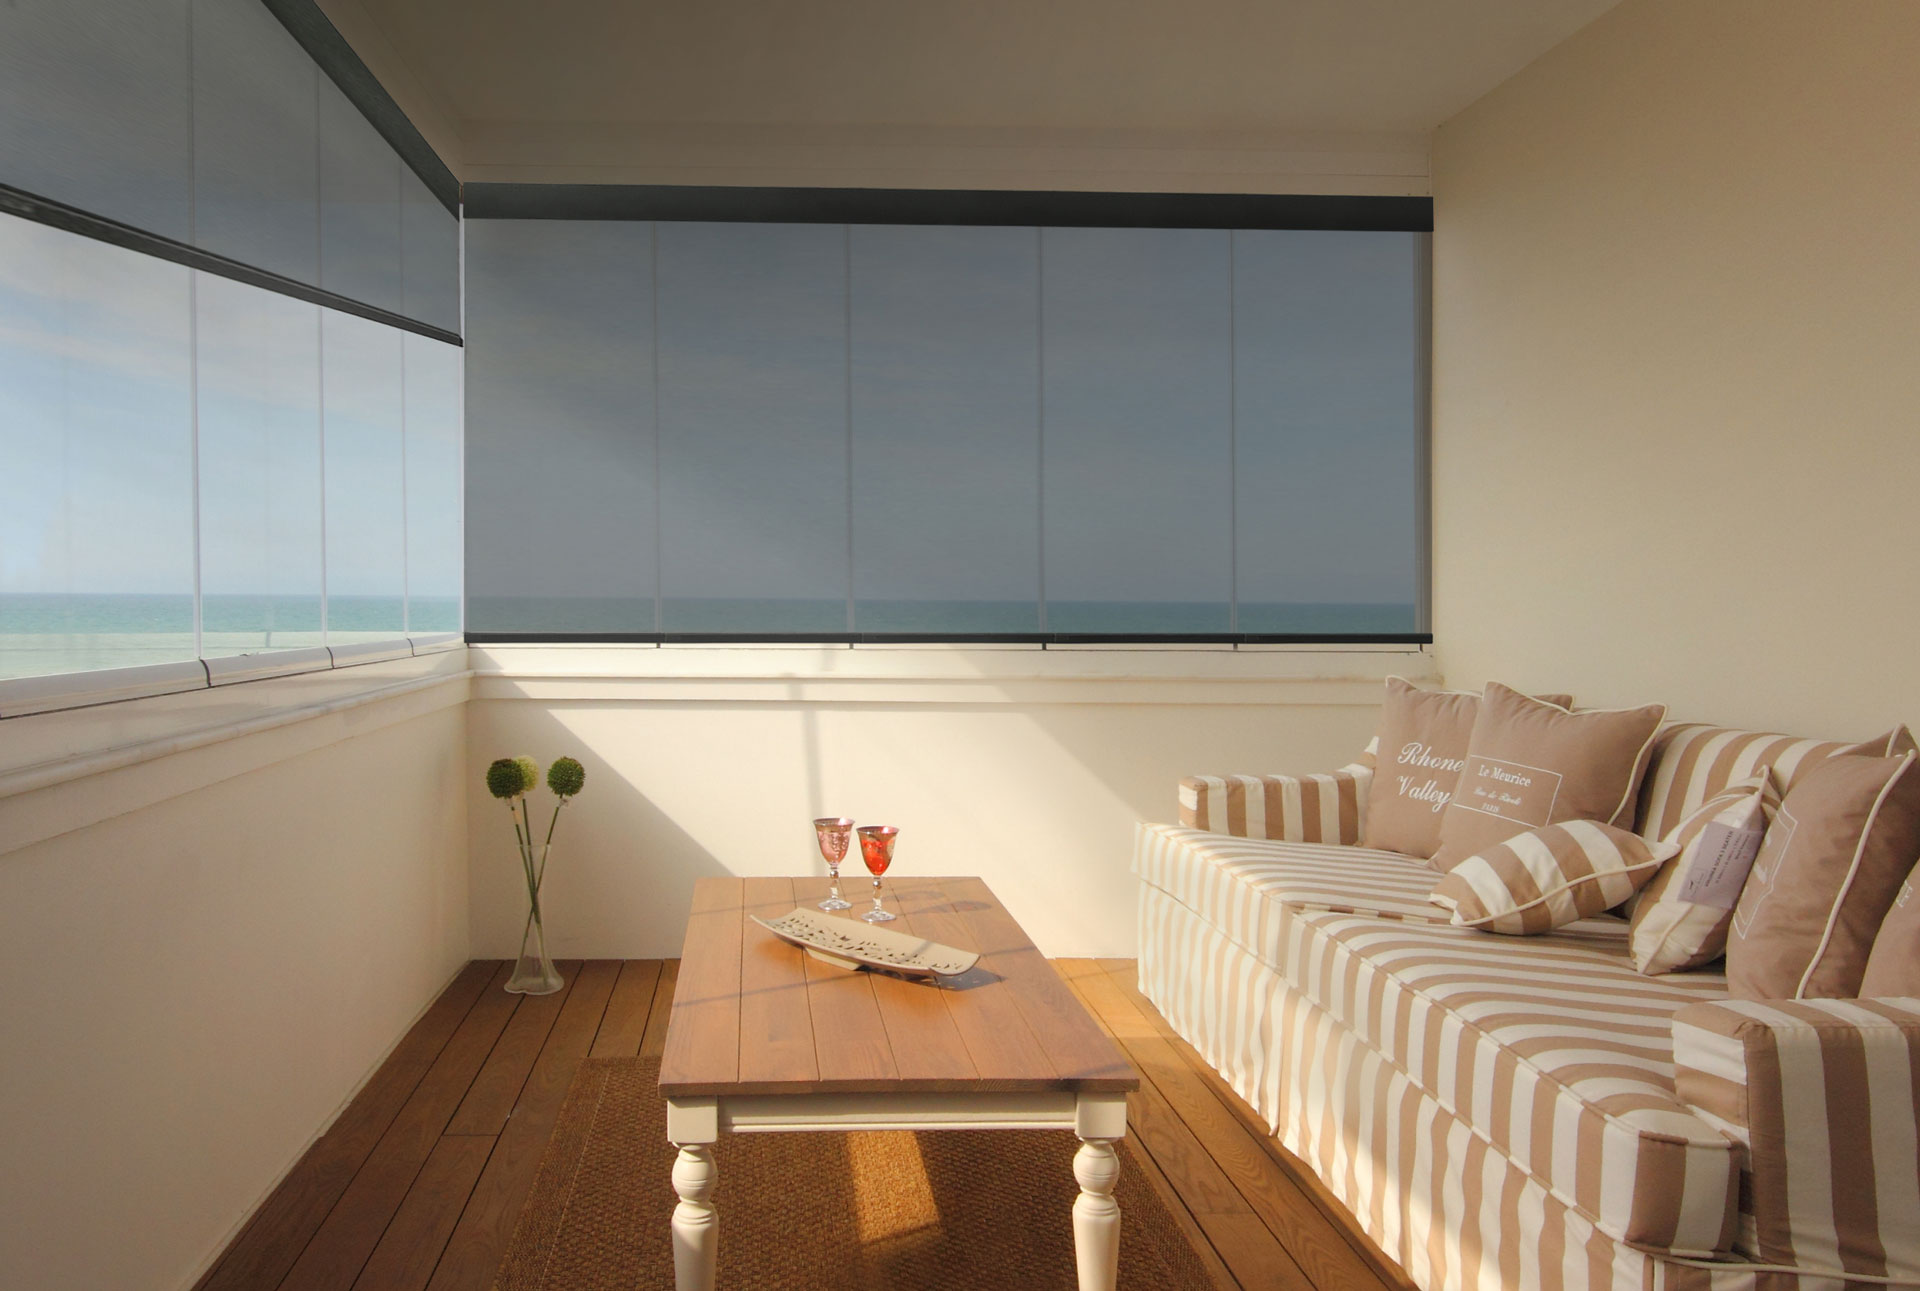 Easy-to-operate cordless solar shades for large windows